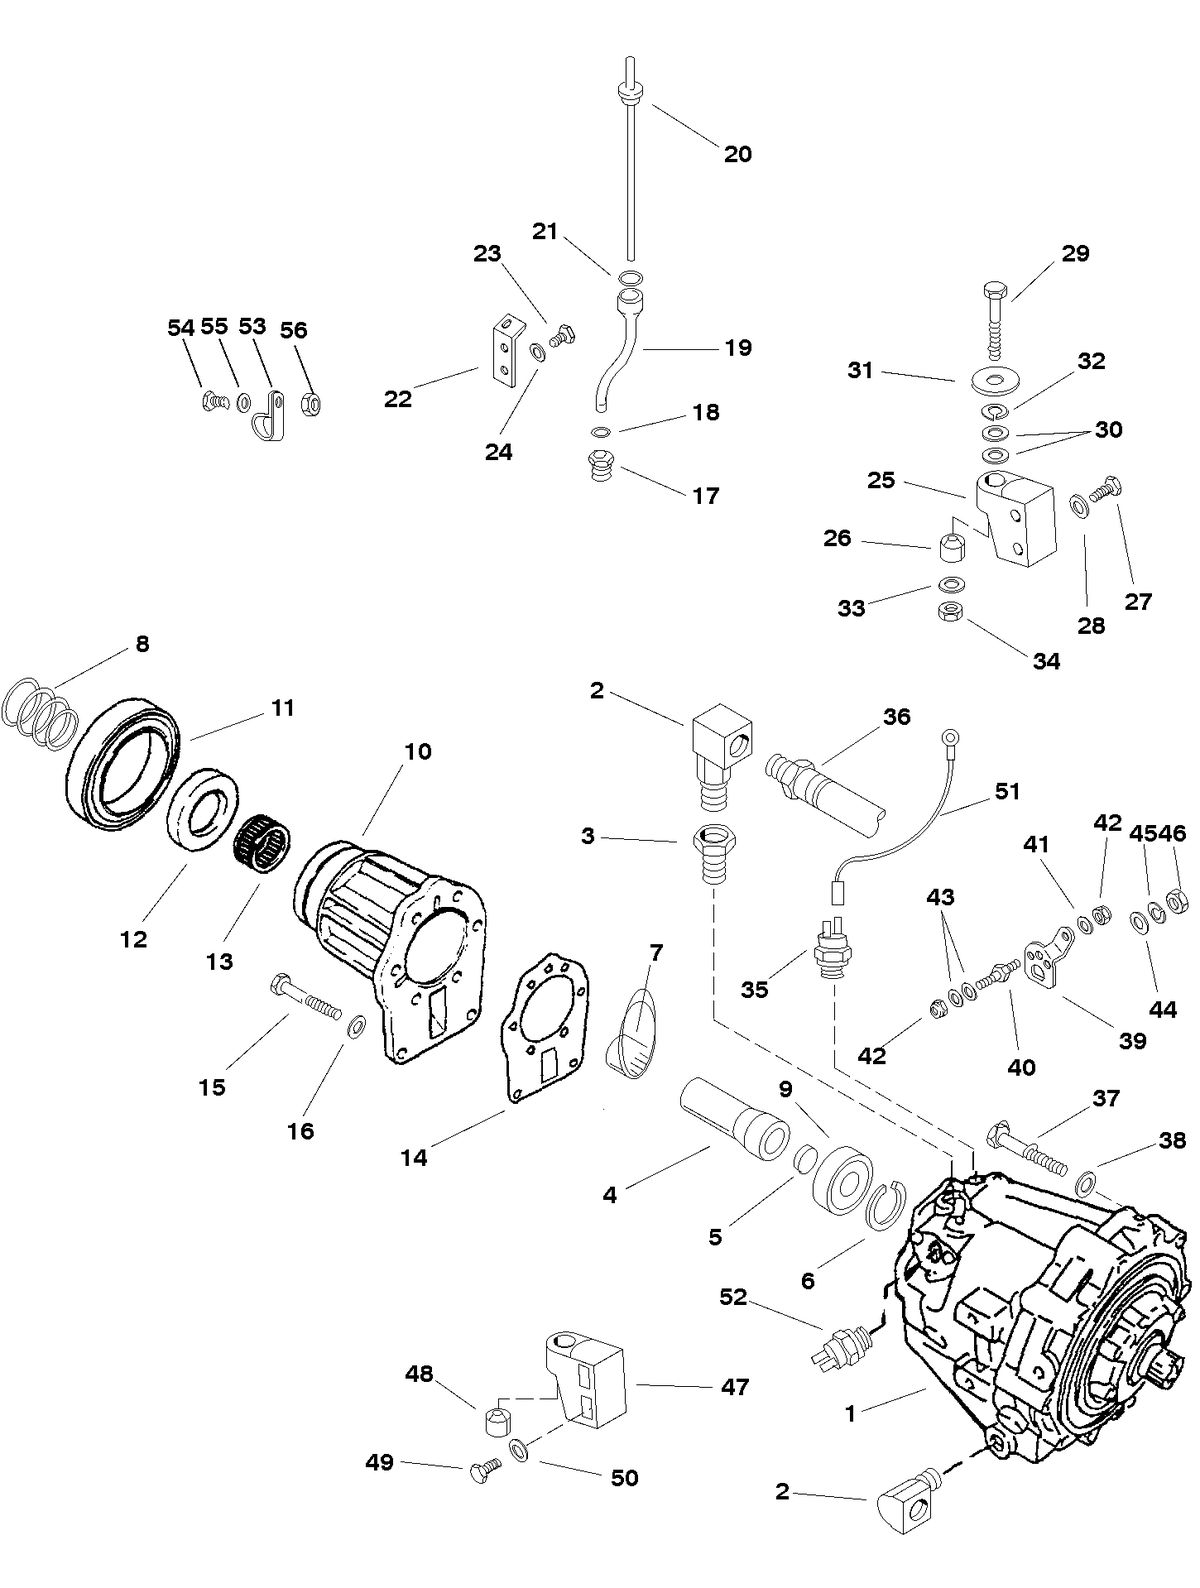 RACE STERNDRIVE HP 500 BULLDOG (540 CID) TRANSMISSION AND COMPONENTS (III AND V DRIVE) (BRAVO)- PG 1